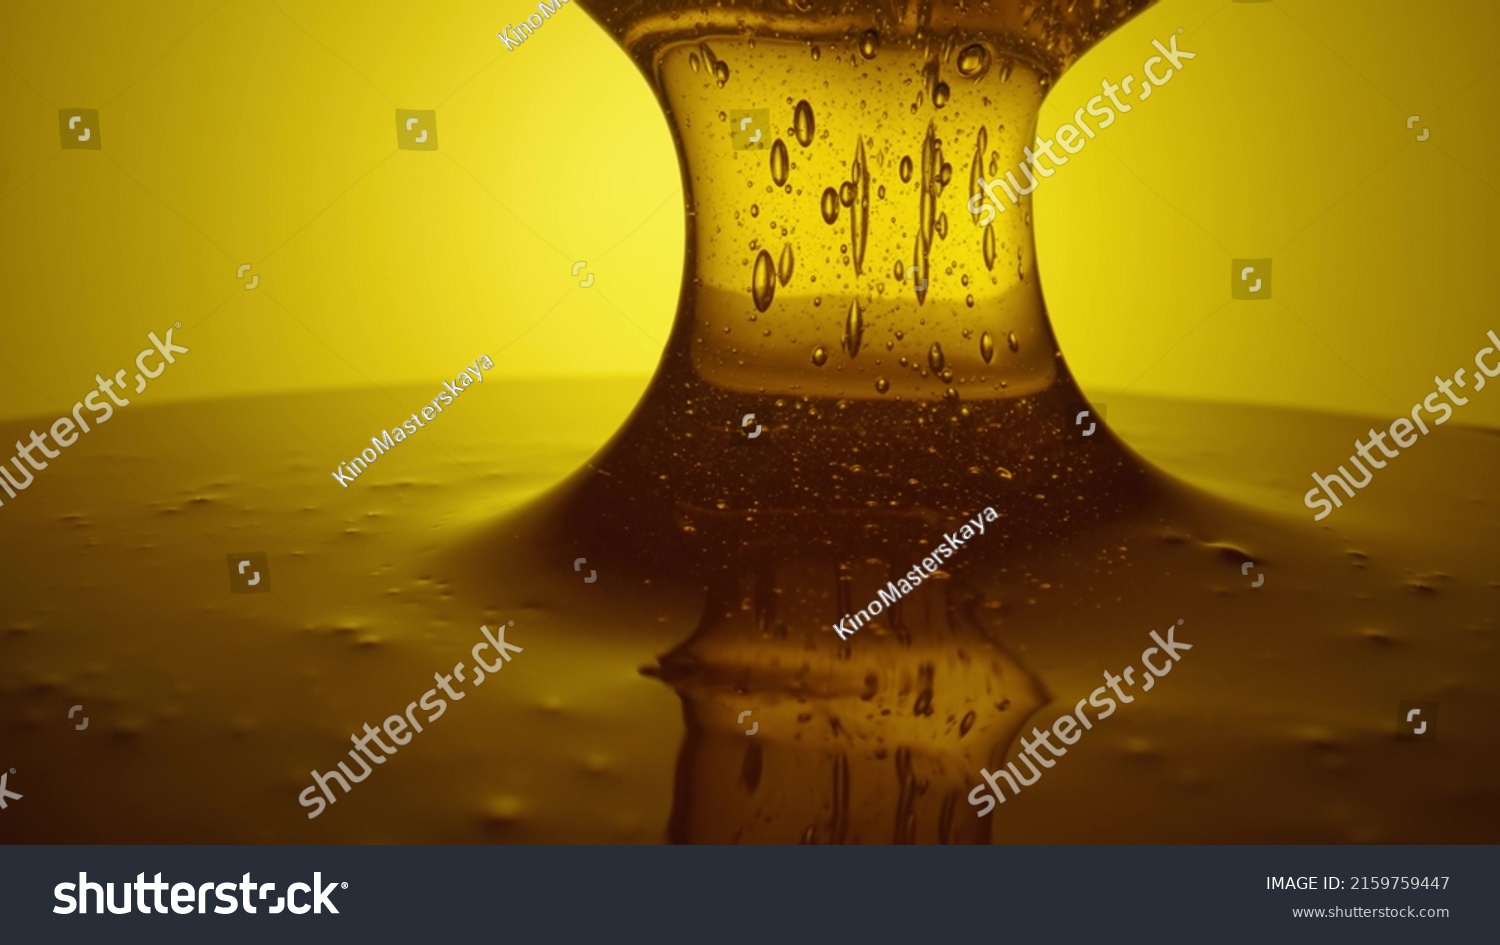 Honey dripping, pouring from spoon. Thick viscous honey molasses dripping. Close up of golden honey liquid, sweet product of beekeeping. Sugar syrup is pouring. Healthy and curative dessert. #2159759447